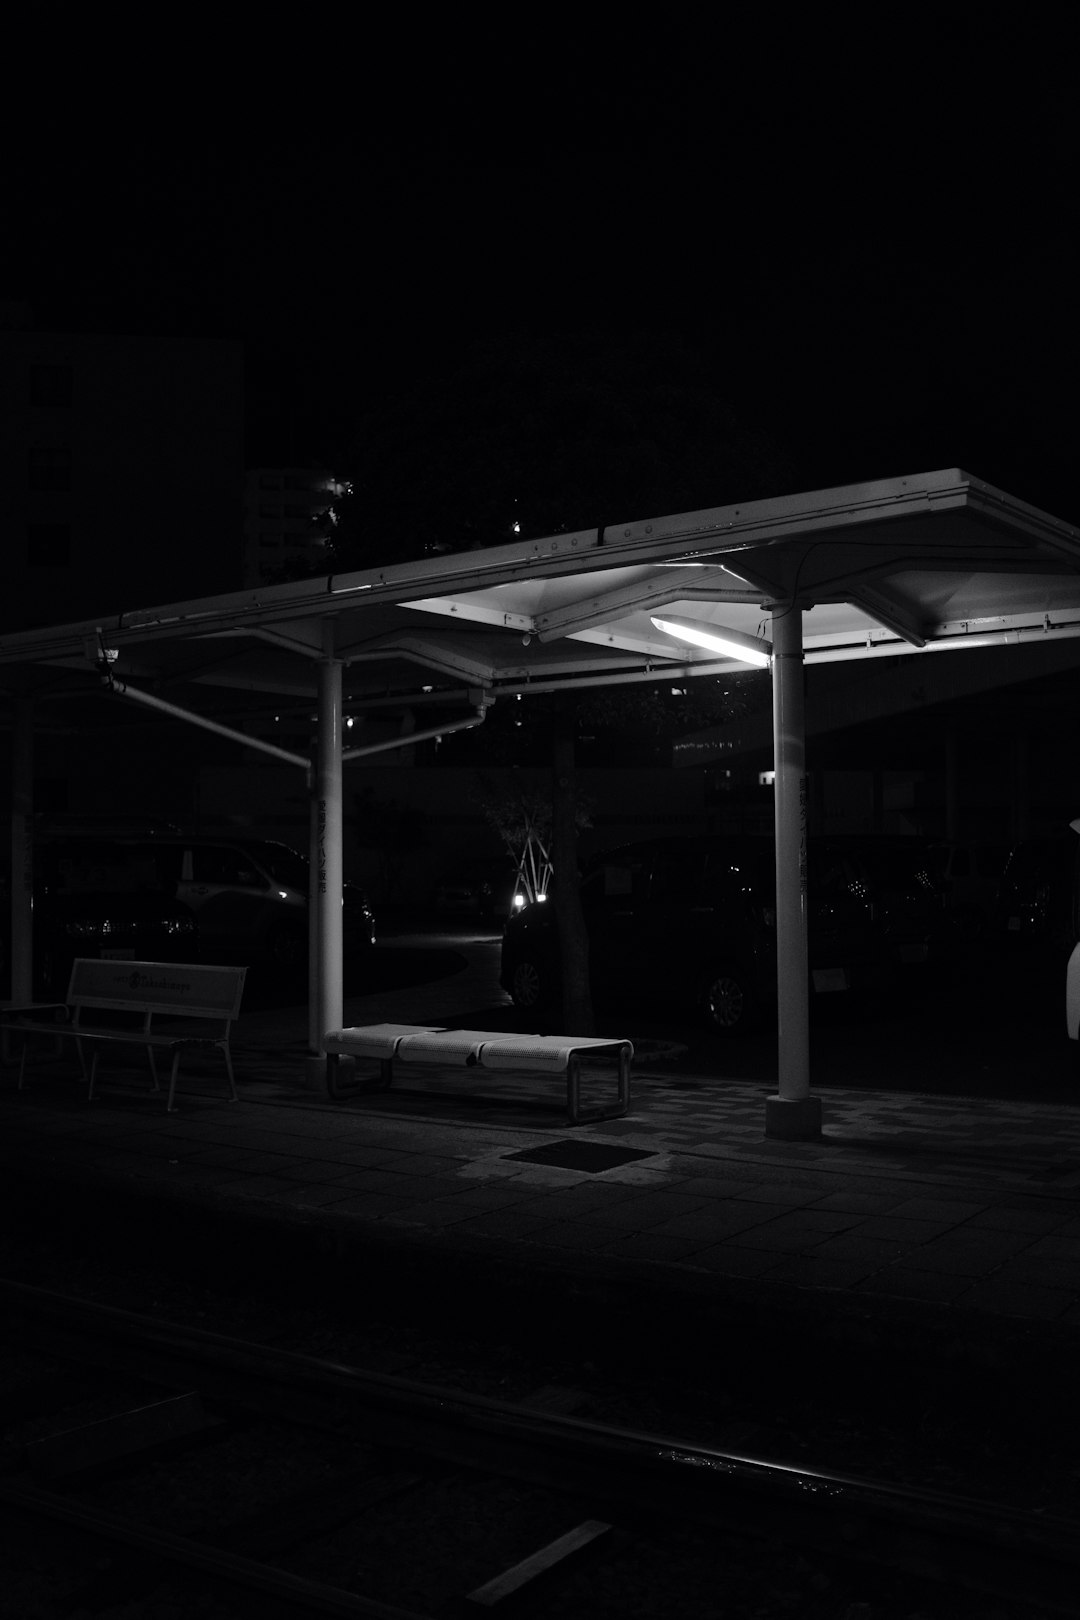 grayscale waiting shed during night